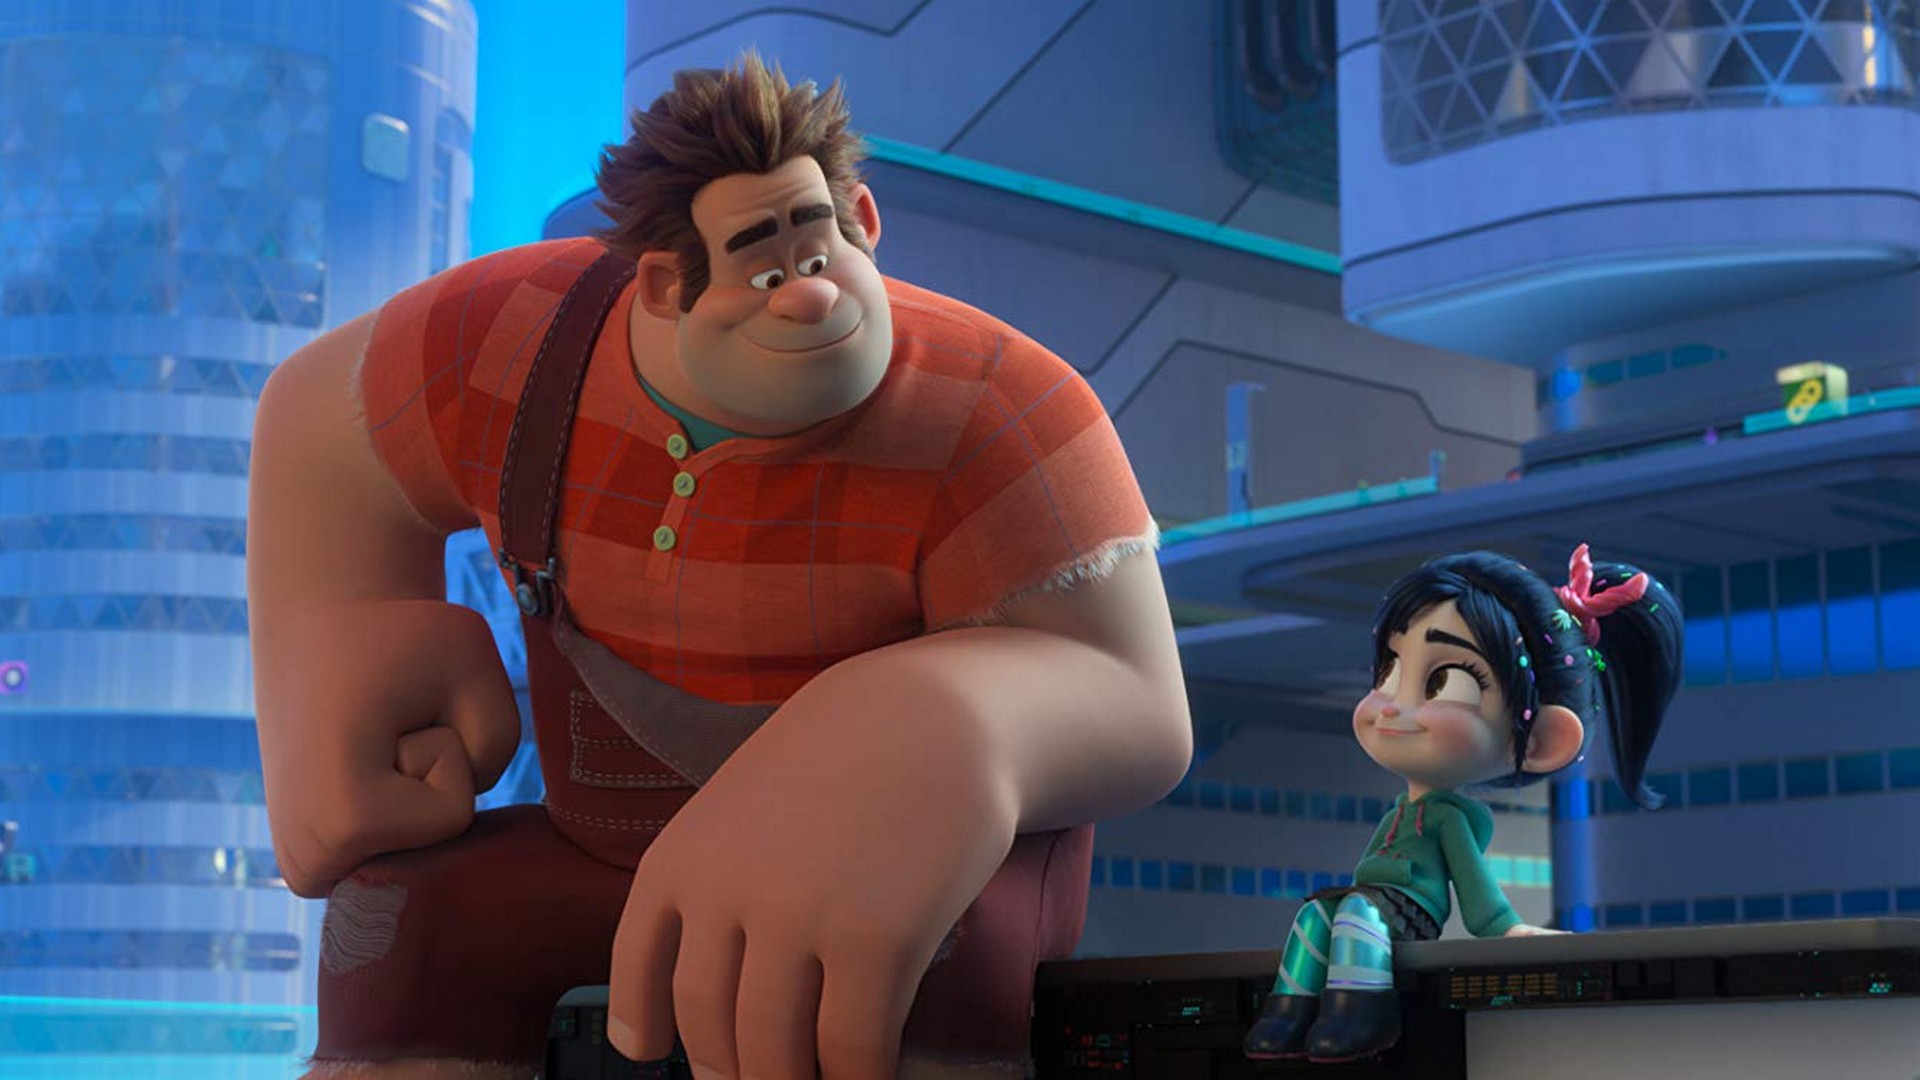 Wallpapers Wreck-It Ralph 2 2018 With Resolution 1920X1080 pixel. You can make this wallpaper for your Mac or Windows Desktop Background, iPhone, Android or Tablet and another Smartphone device for free